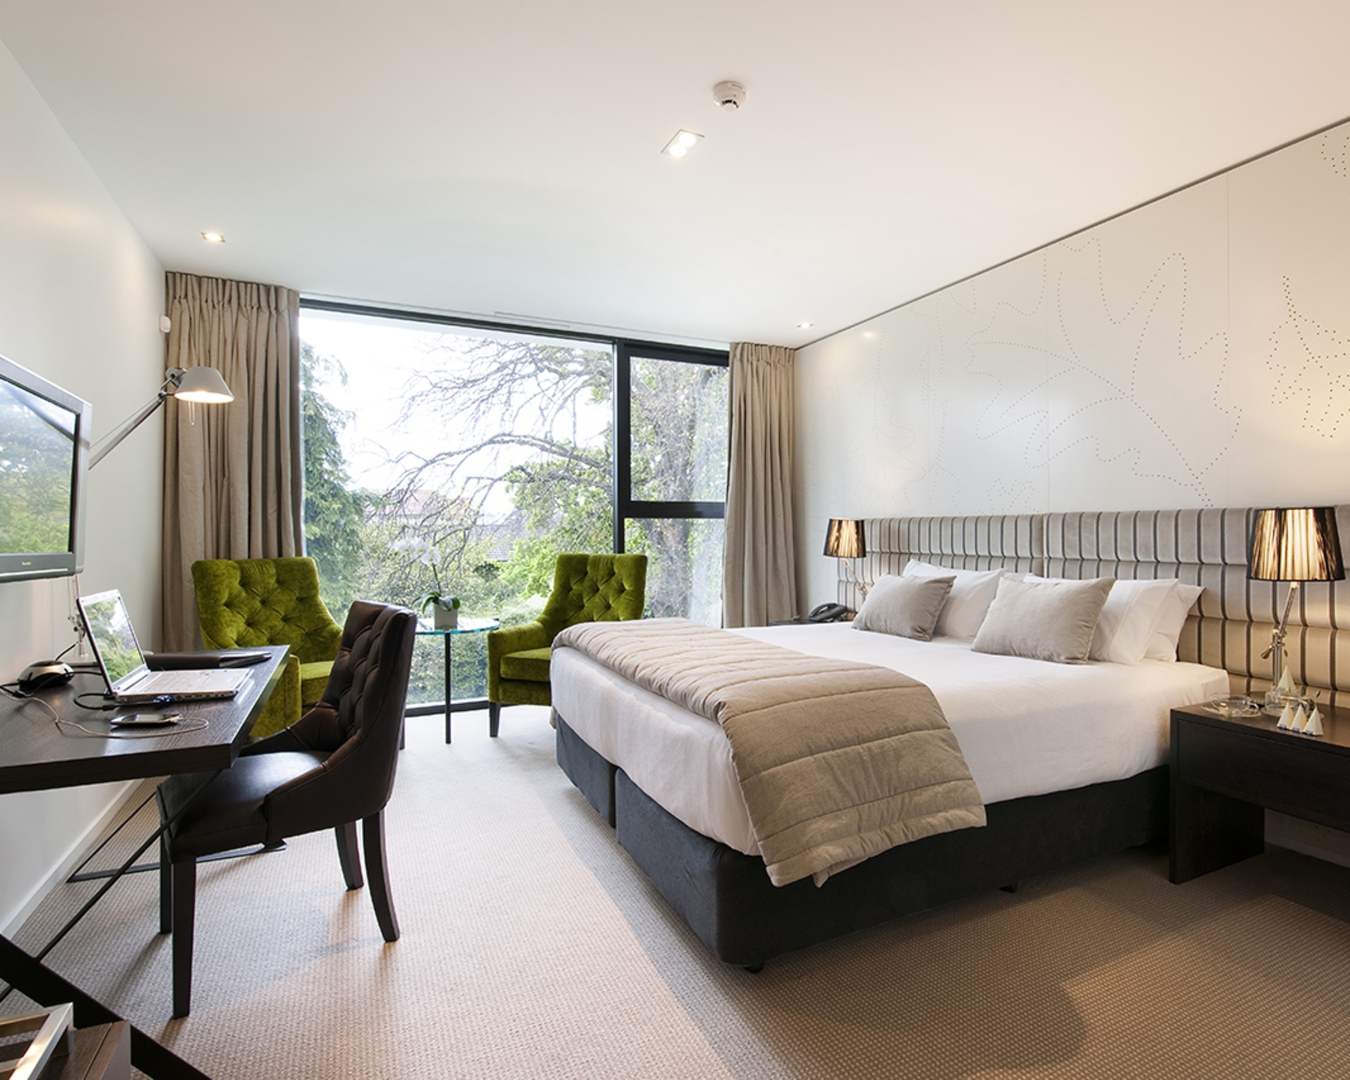 Bathed in natural light from a floor-to-ceiling window, this airy room at The George features a comfy bed and inviting seating area